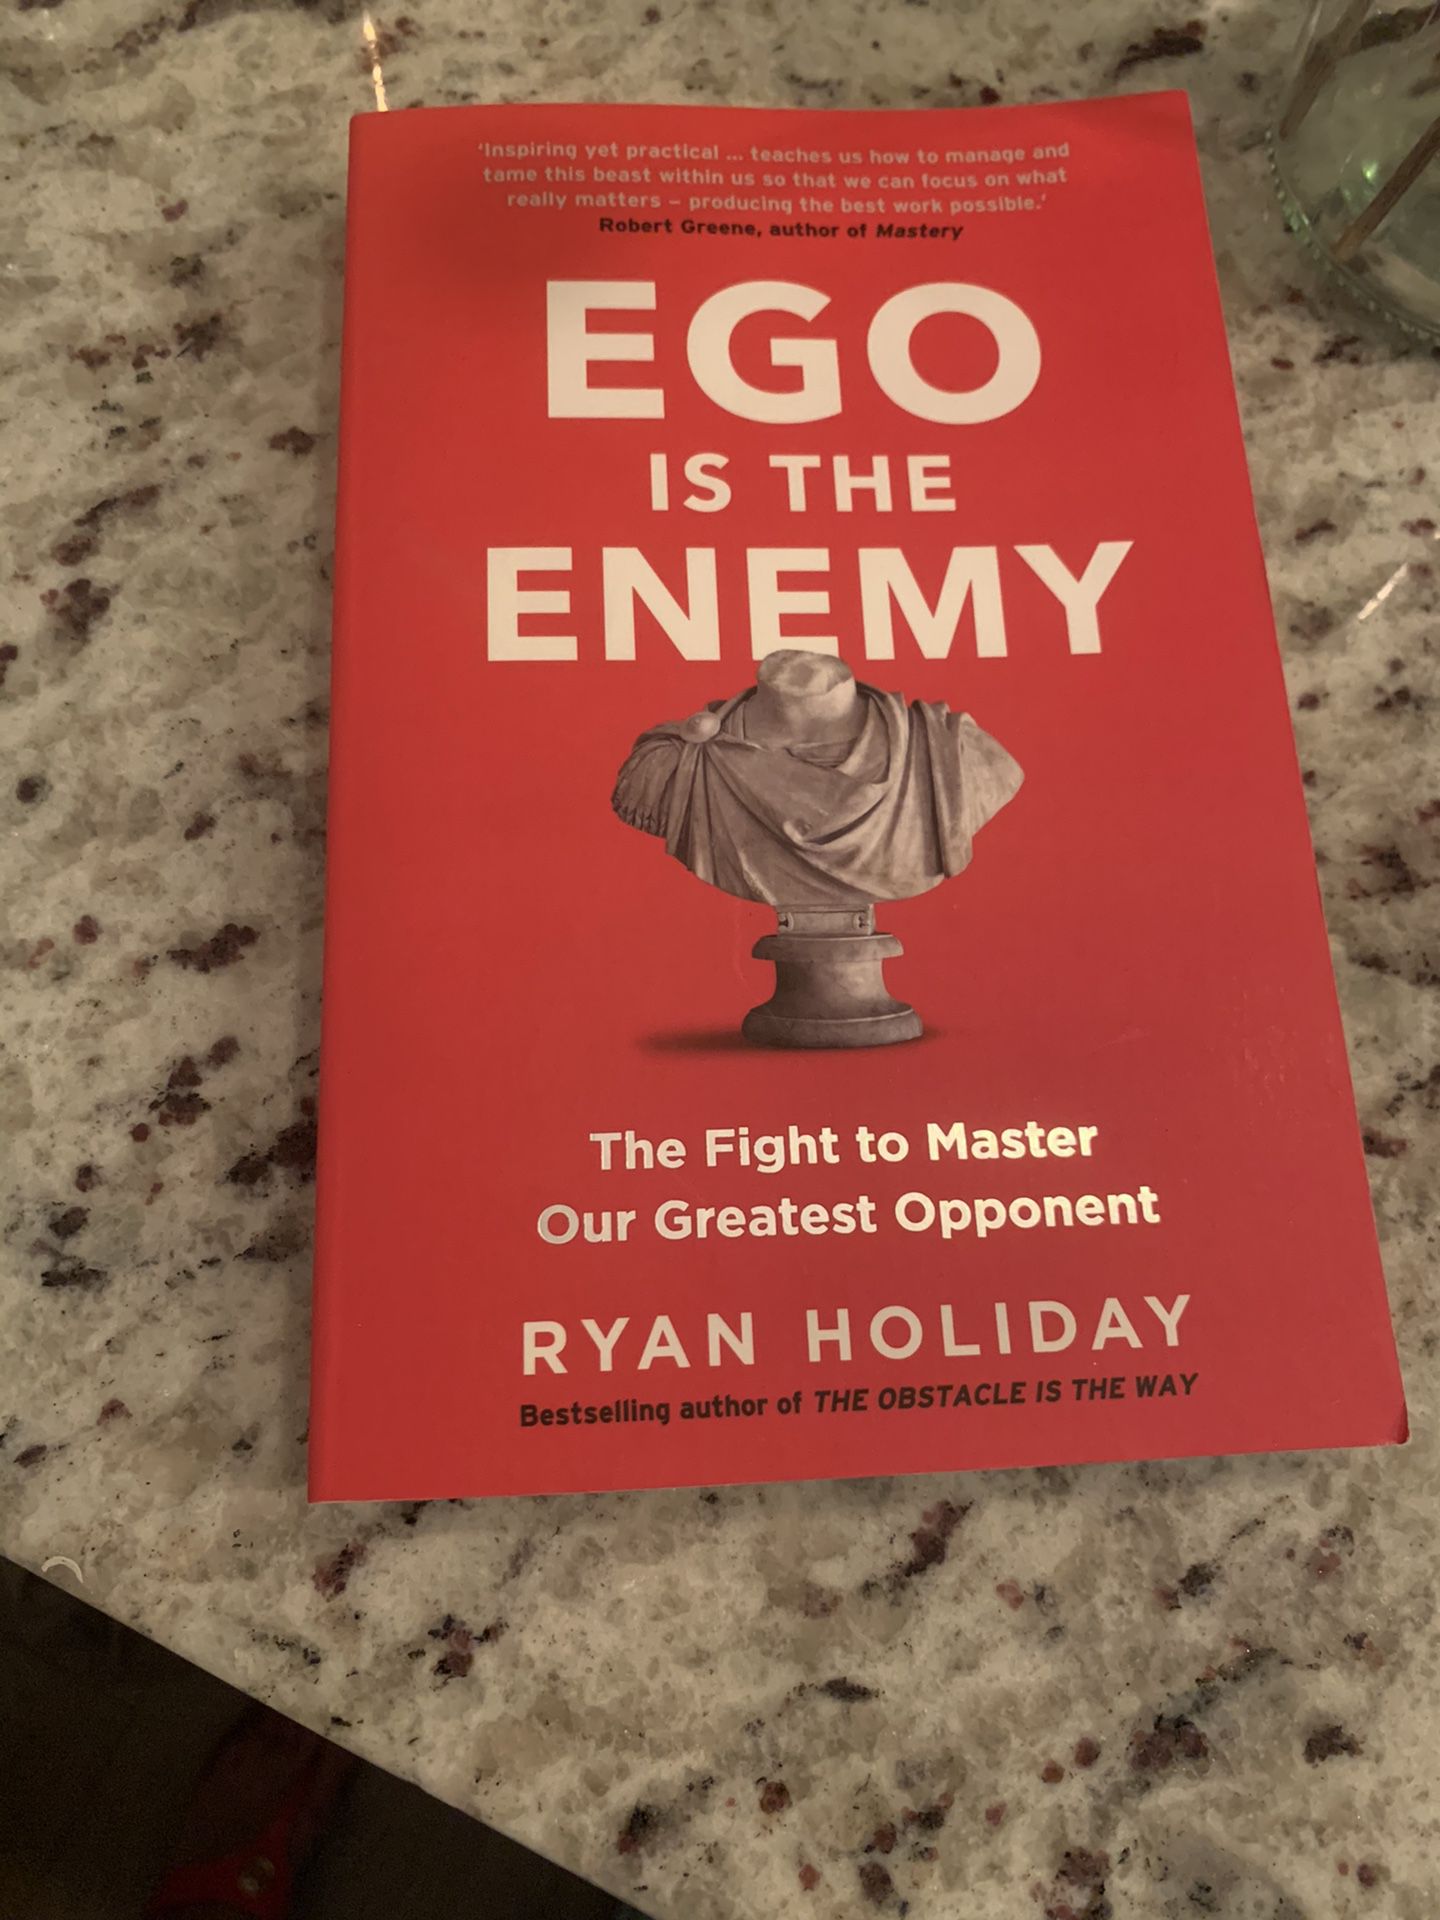 Ego is the enemy book Ryan holiday